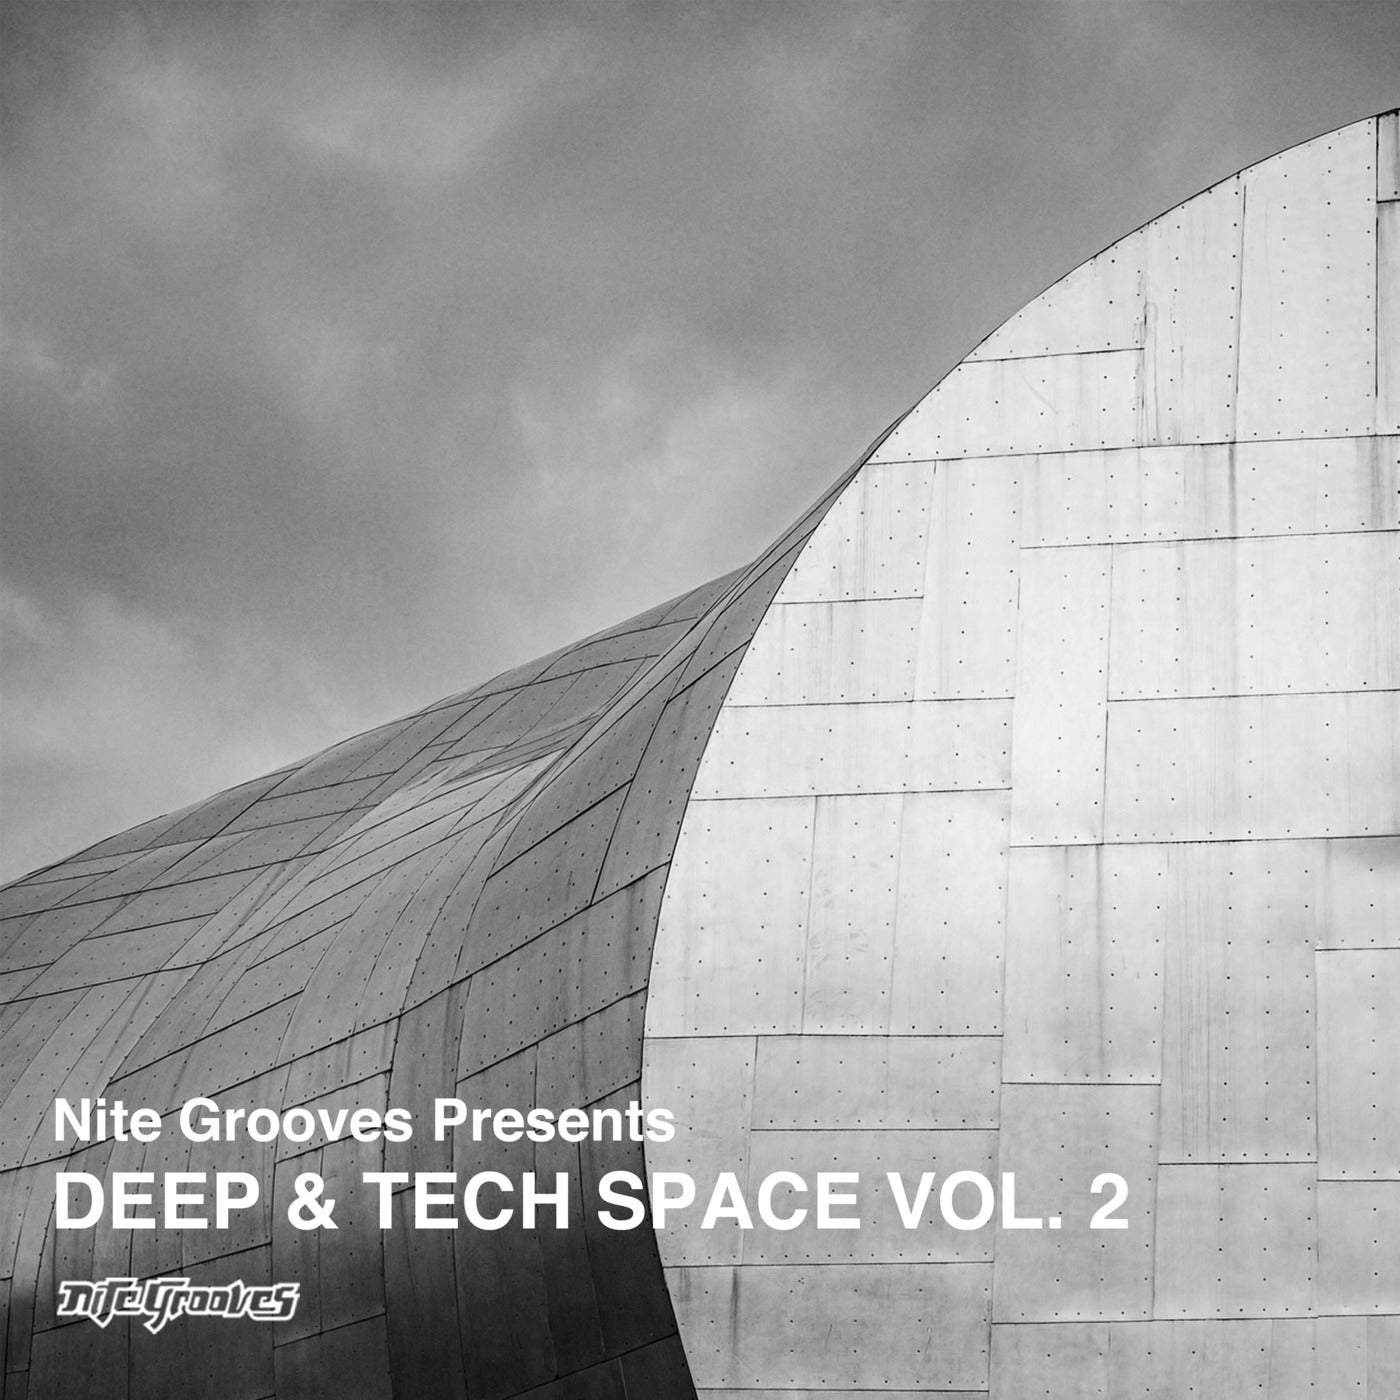 Download VA - Nite Grooves Presents Deep & Tech Space, Vol. 2 on Electrobuzz